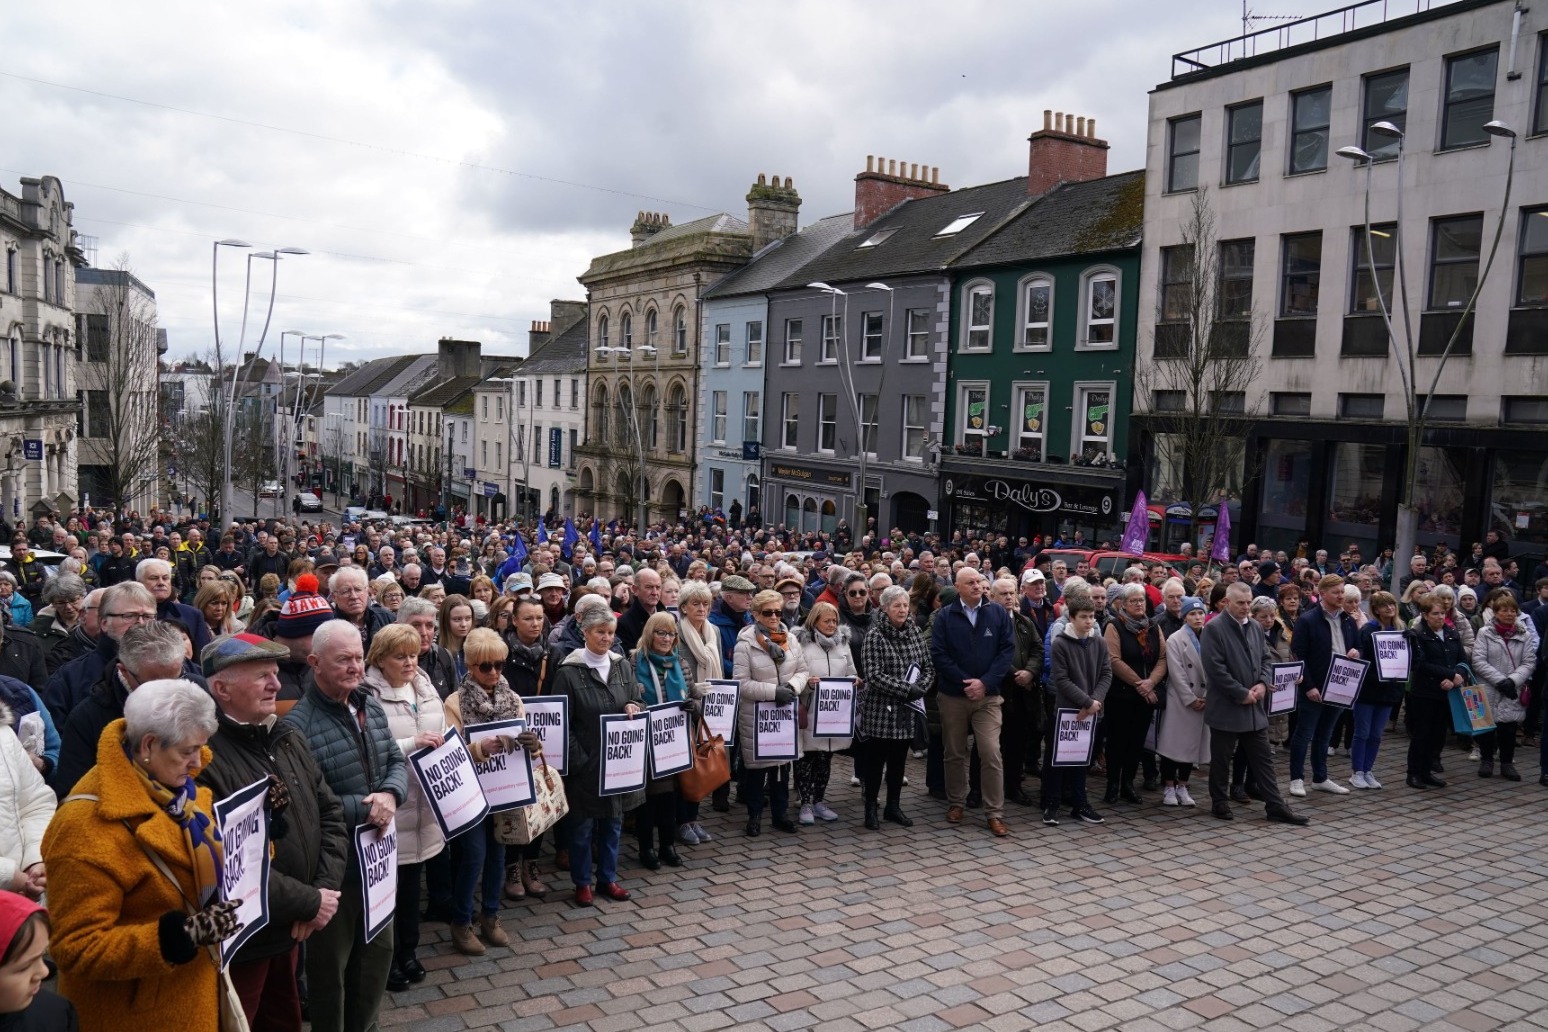 Crowds gather in Omagh to demand end to violence after police officer’s shooting 